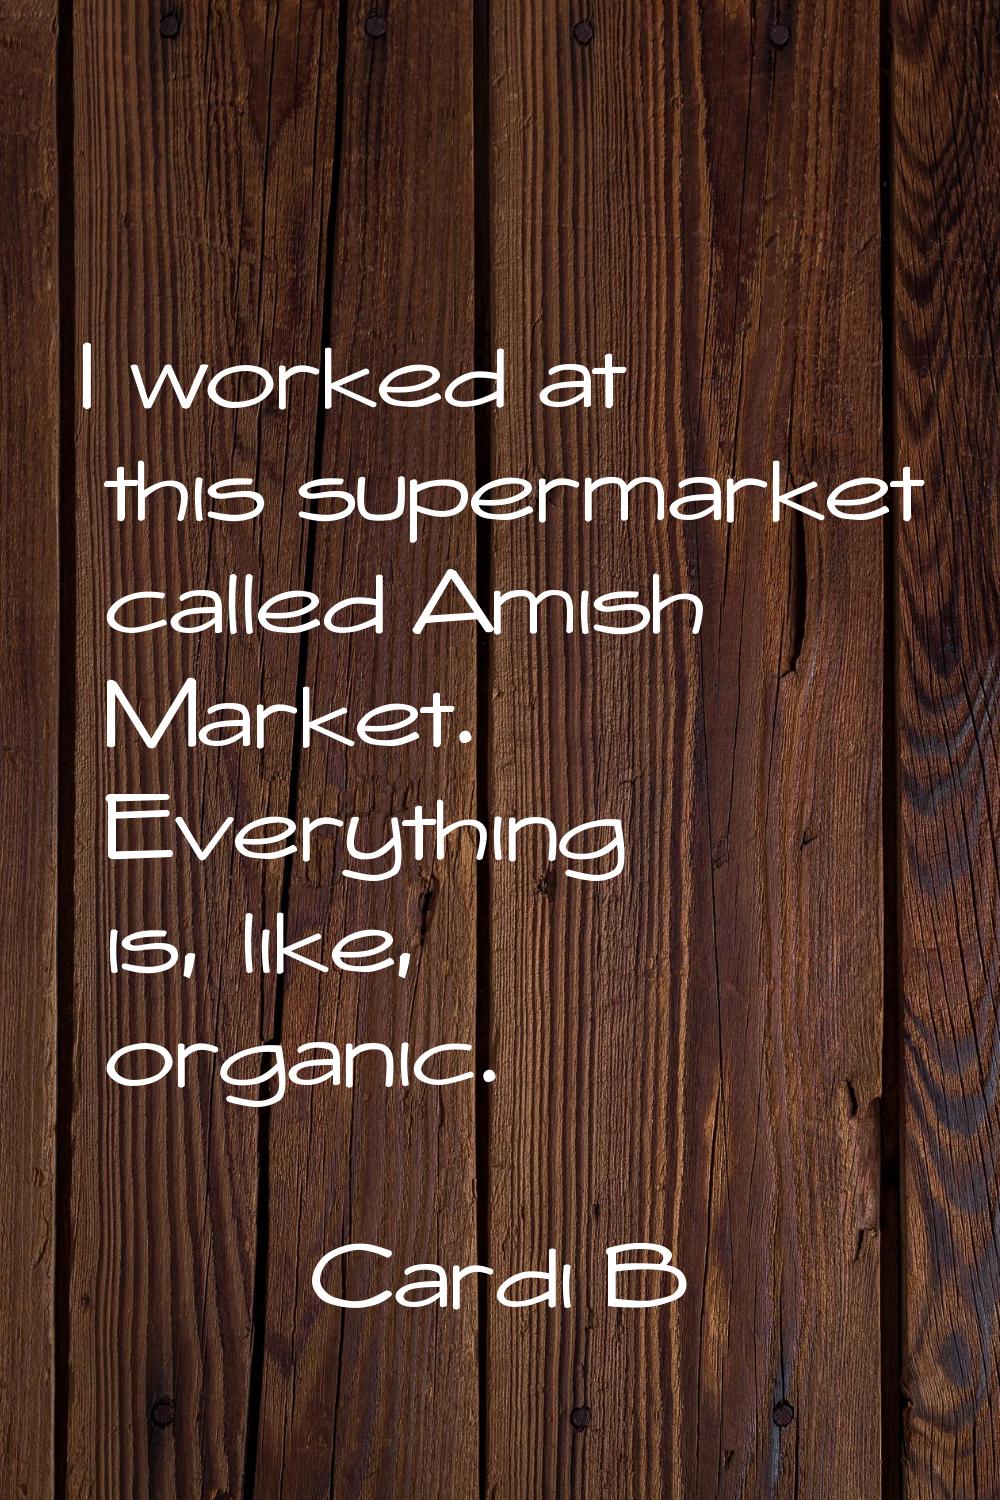 I worked at this supermarket called Amish Market. Everything is, like, organic.